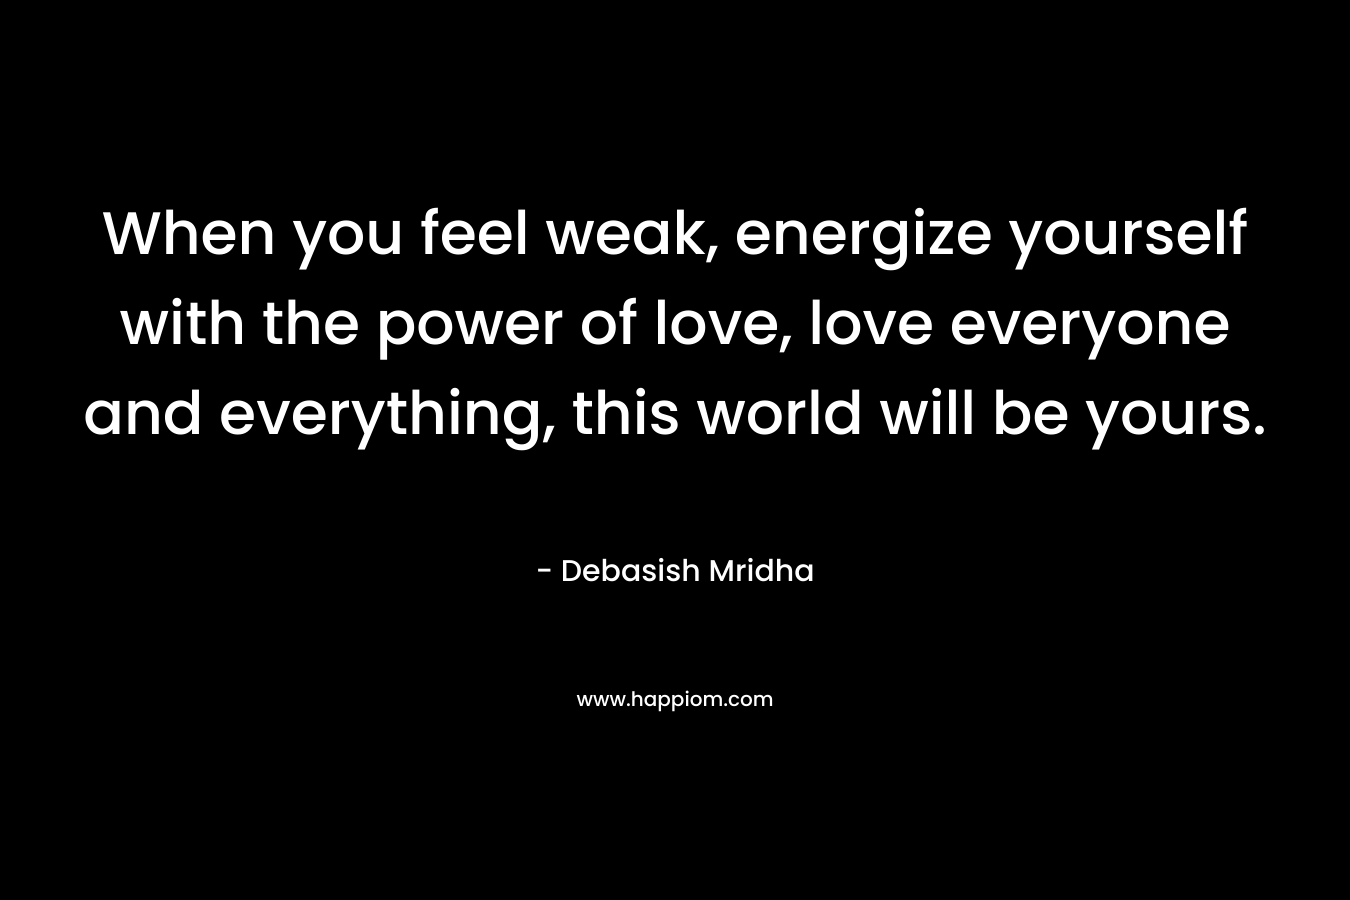 When you feel weak, energize yourself with the power of love, love everyone and everything, this world will be yours.